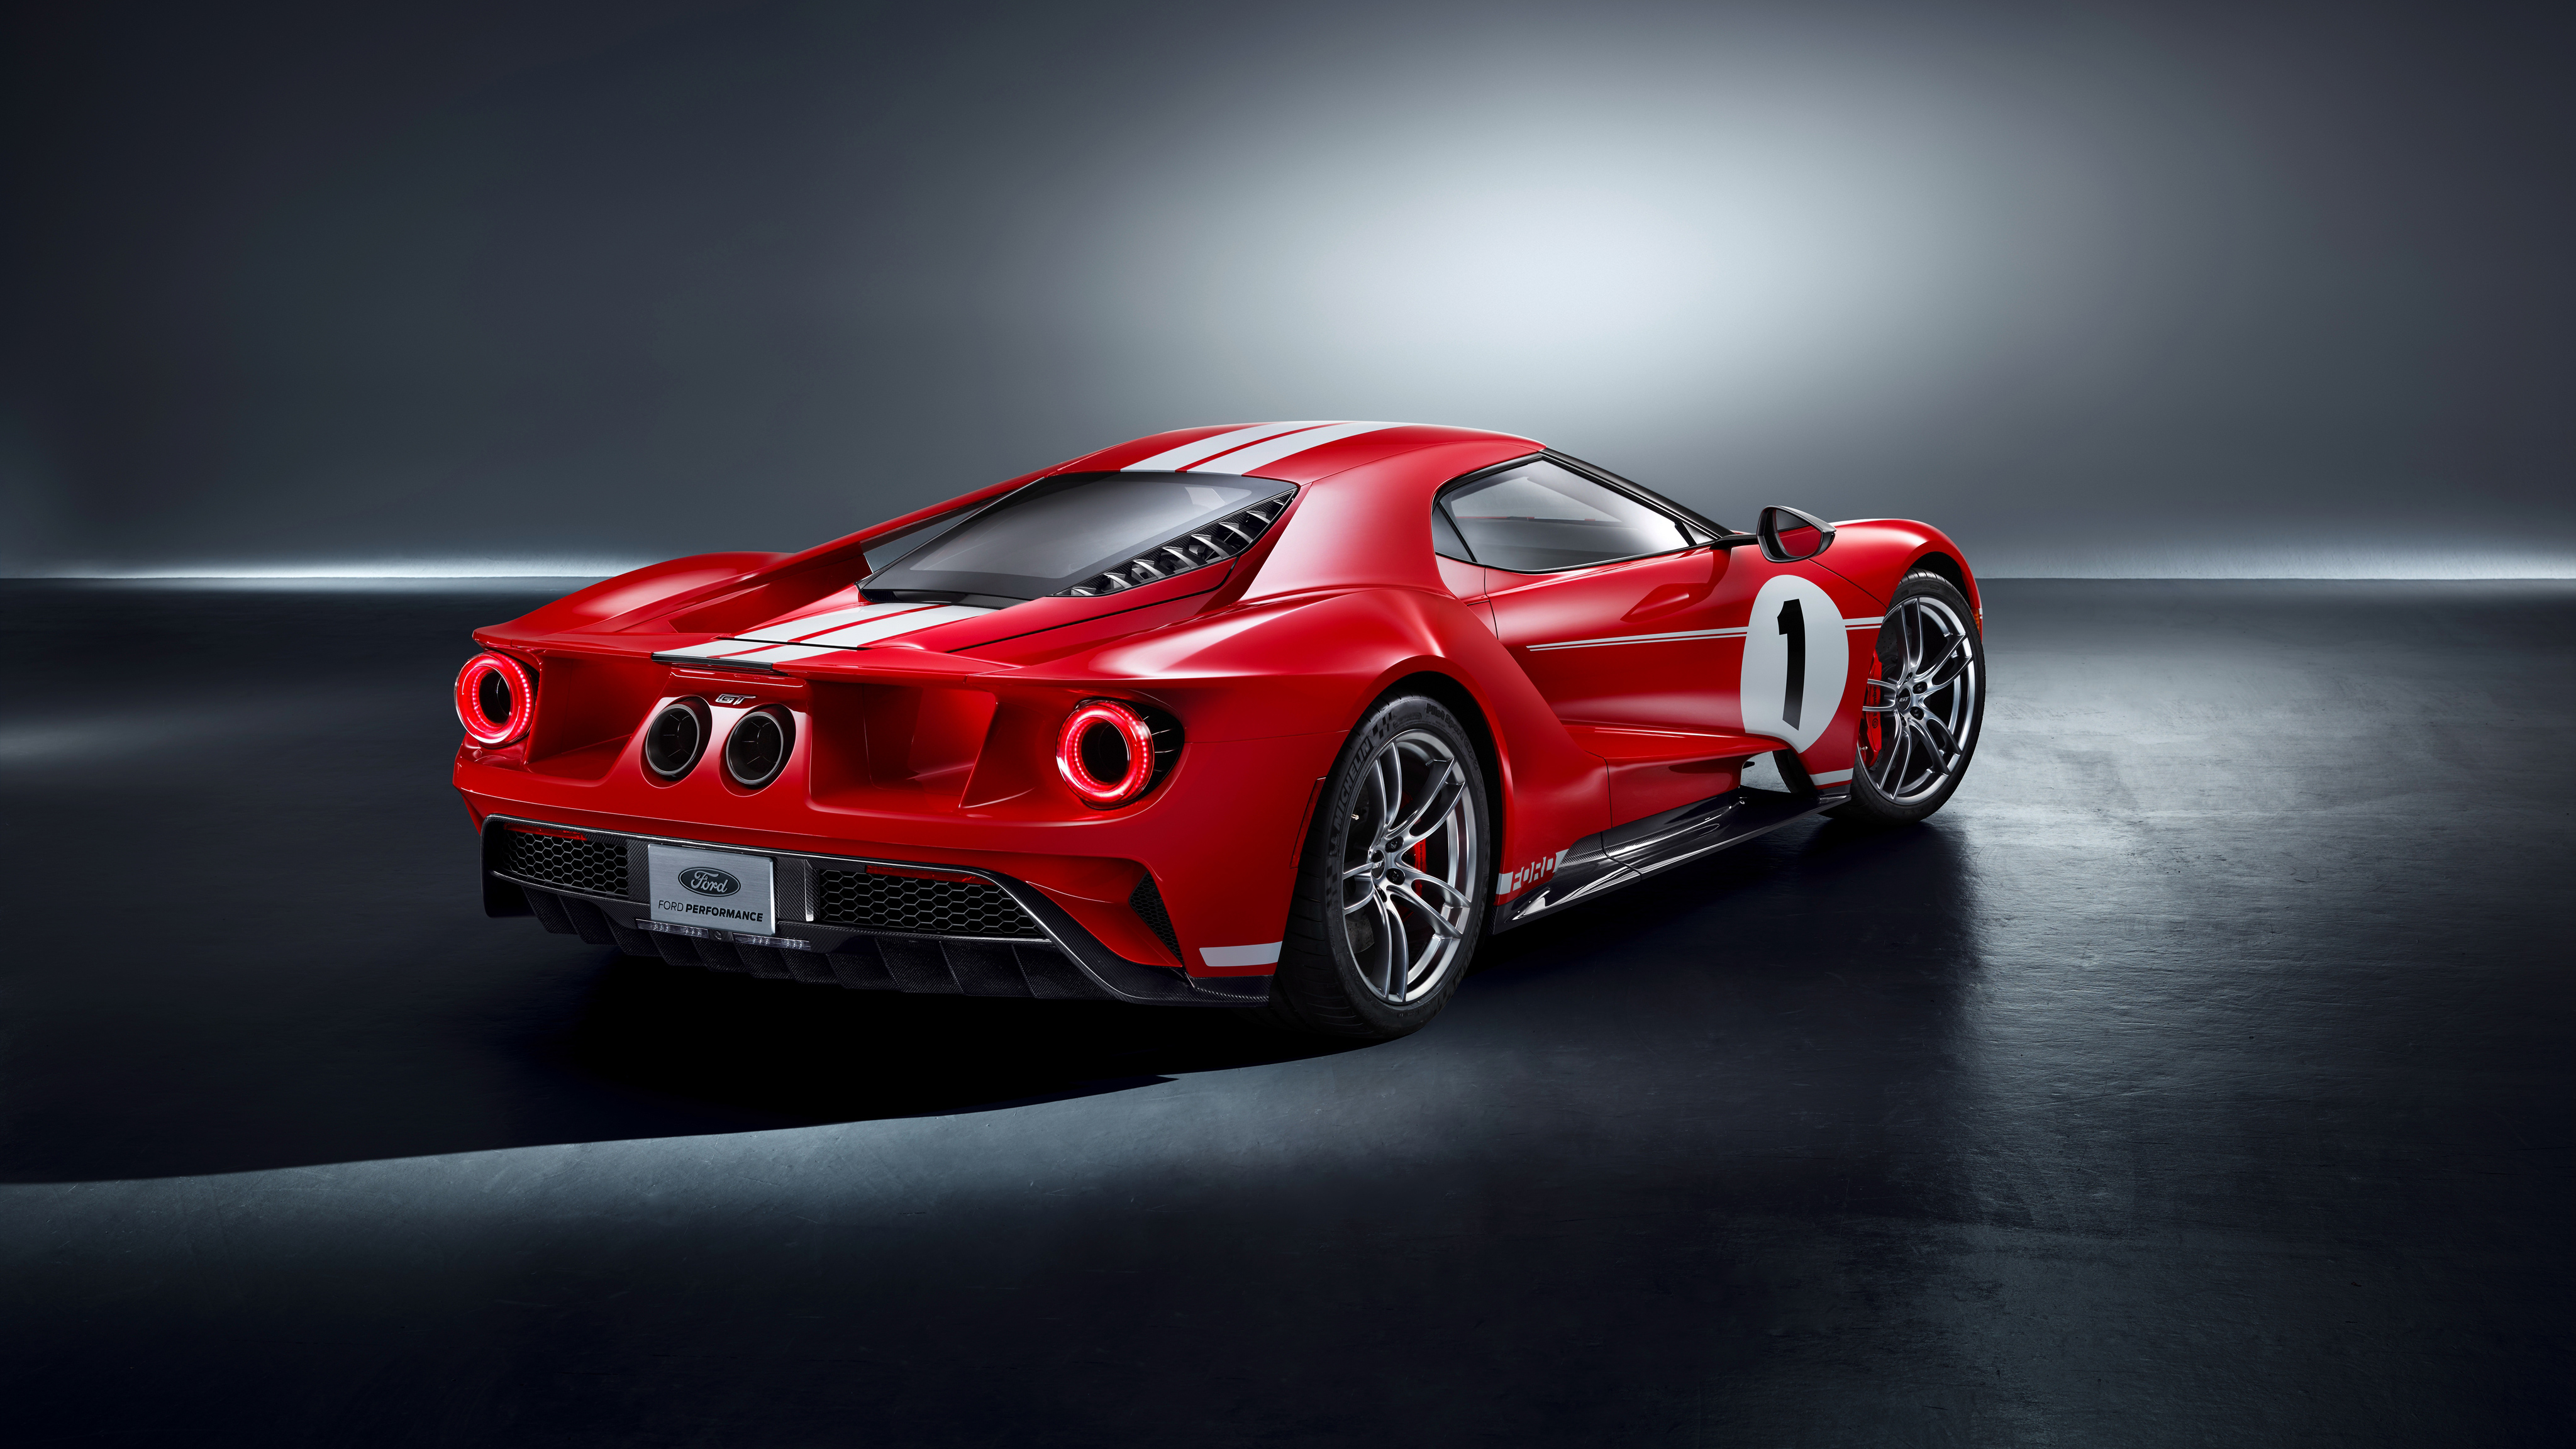 2018 Ford Gt 67 Heritage Edition 4k 2 Wallpaper Hd Car Wallpapers Id 8622